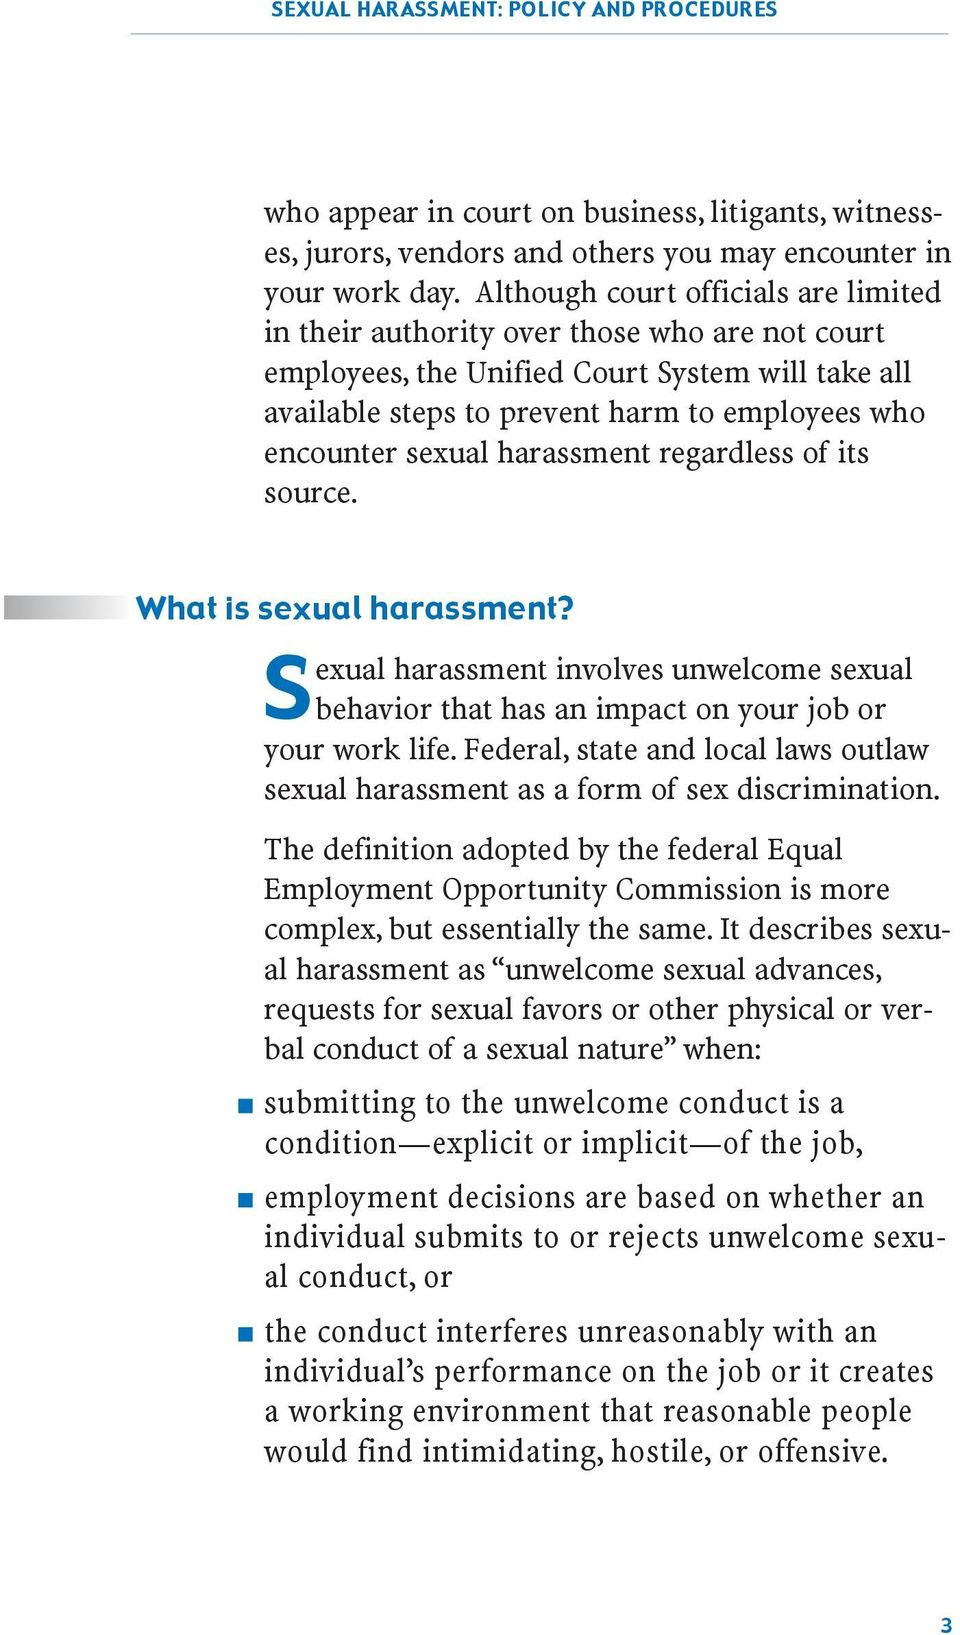 sexual harassment regardless of its source. What is sexual harassment? Sexual harassment involves unwelcome sexual behavior that has an impact on your job or your work life.